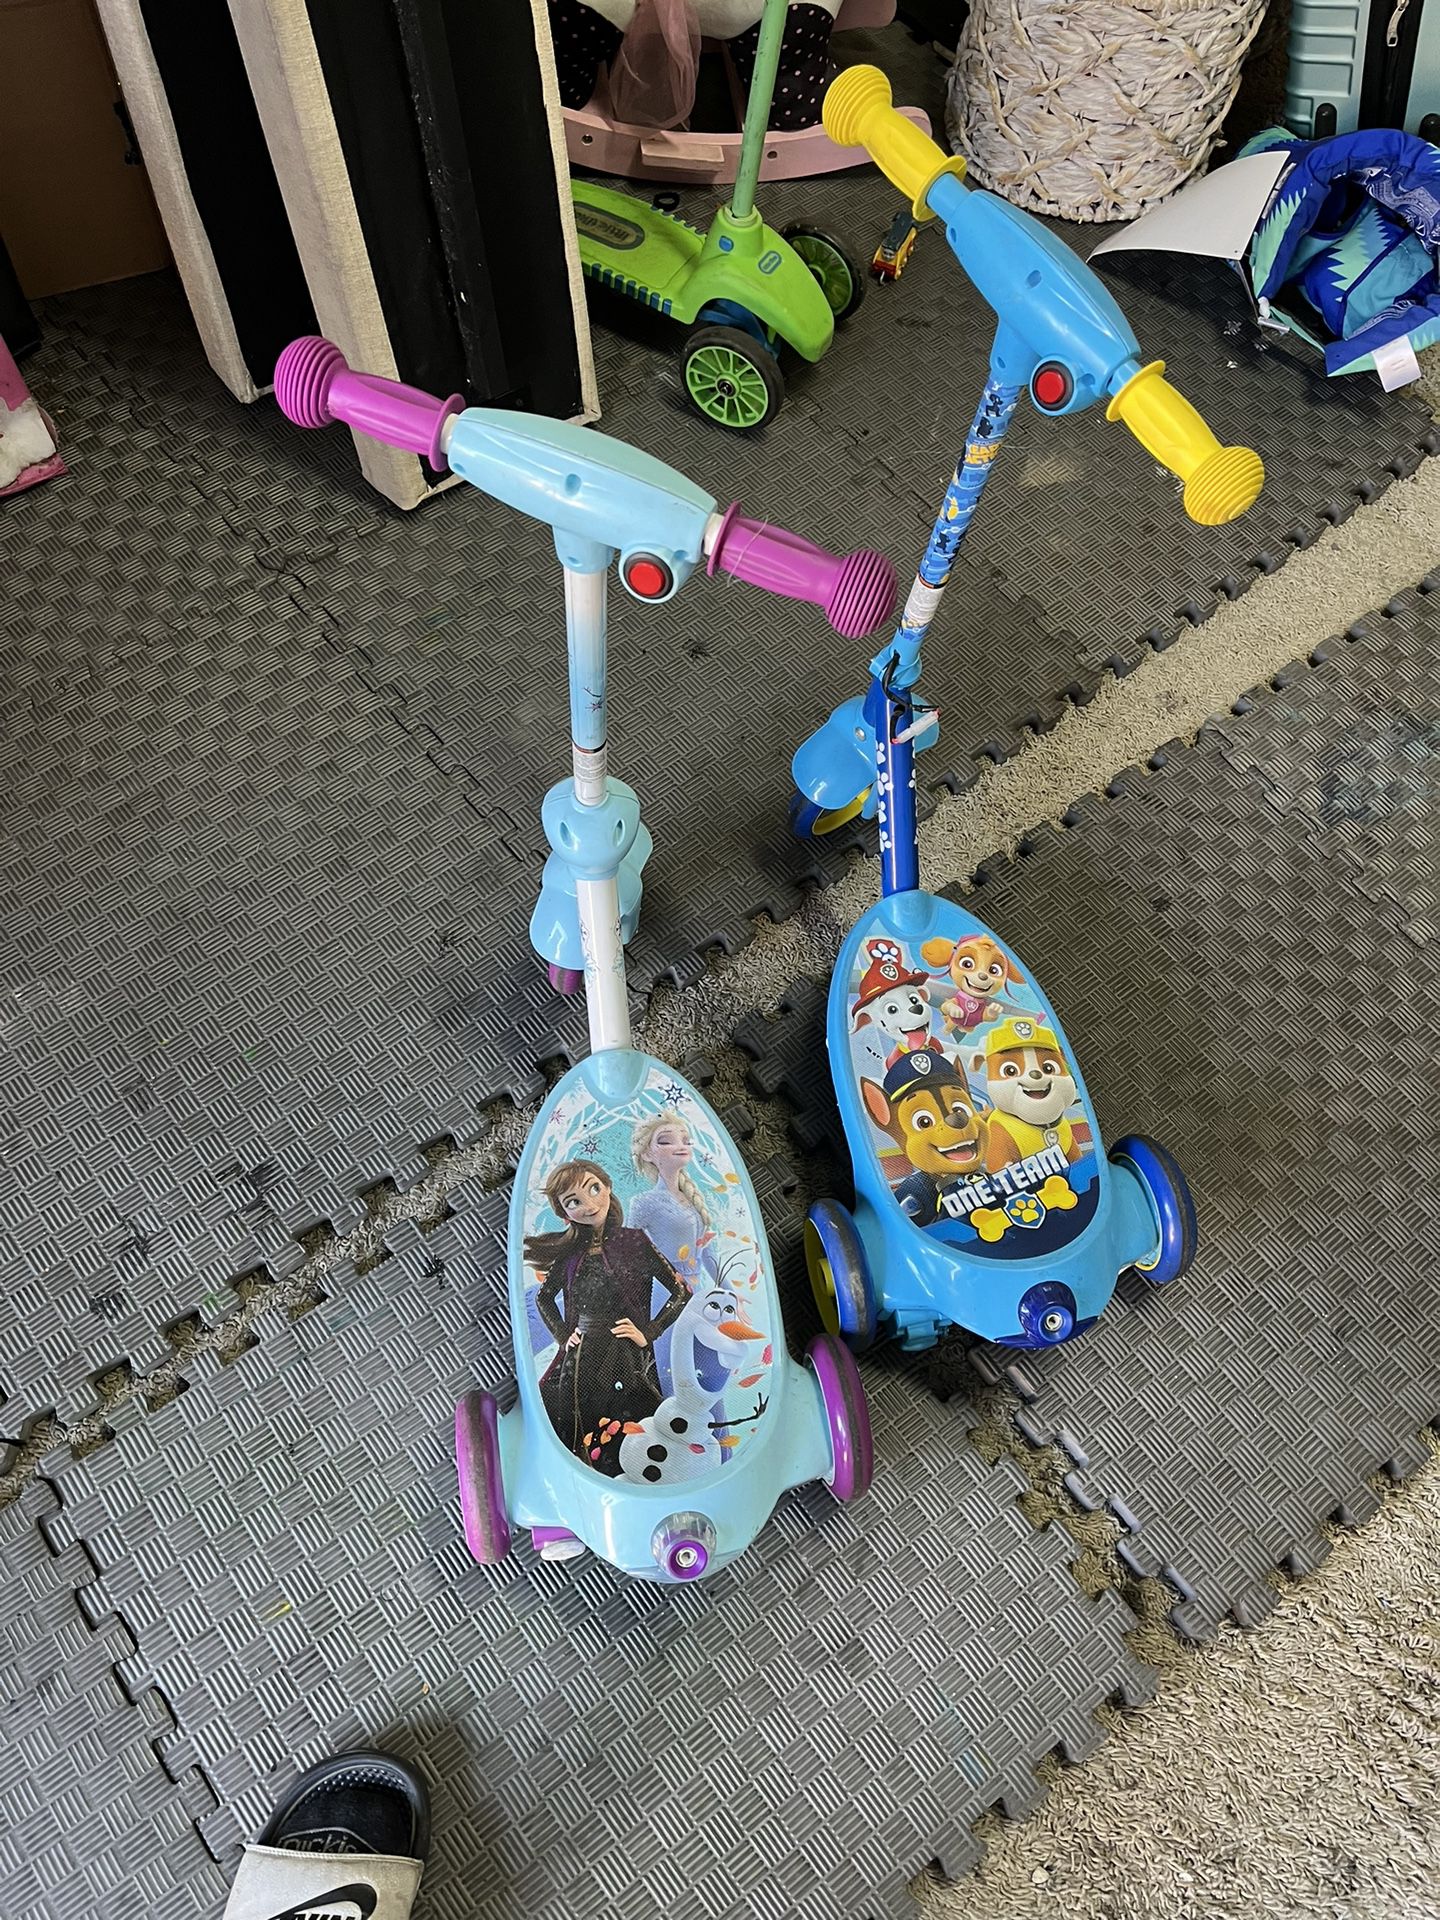 Kids Electric Scooters